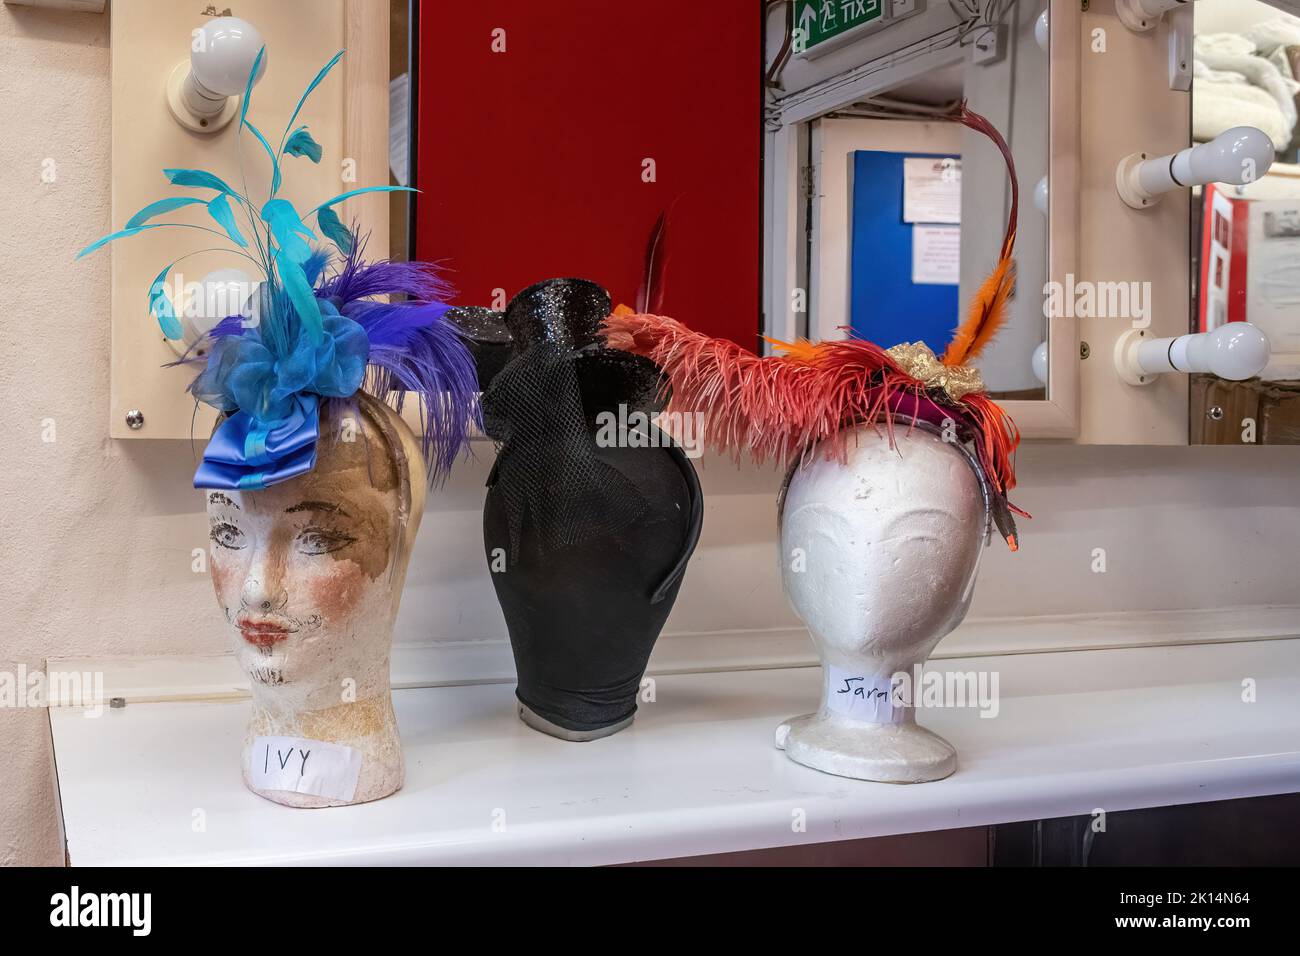 Chesil Theatre, in the former 12th century church of St Peter Chesil, in Winchester, Hampshire, UK. Mannequin heads with hats in the dressing room. Stock Photo